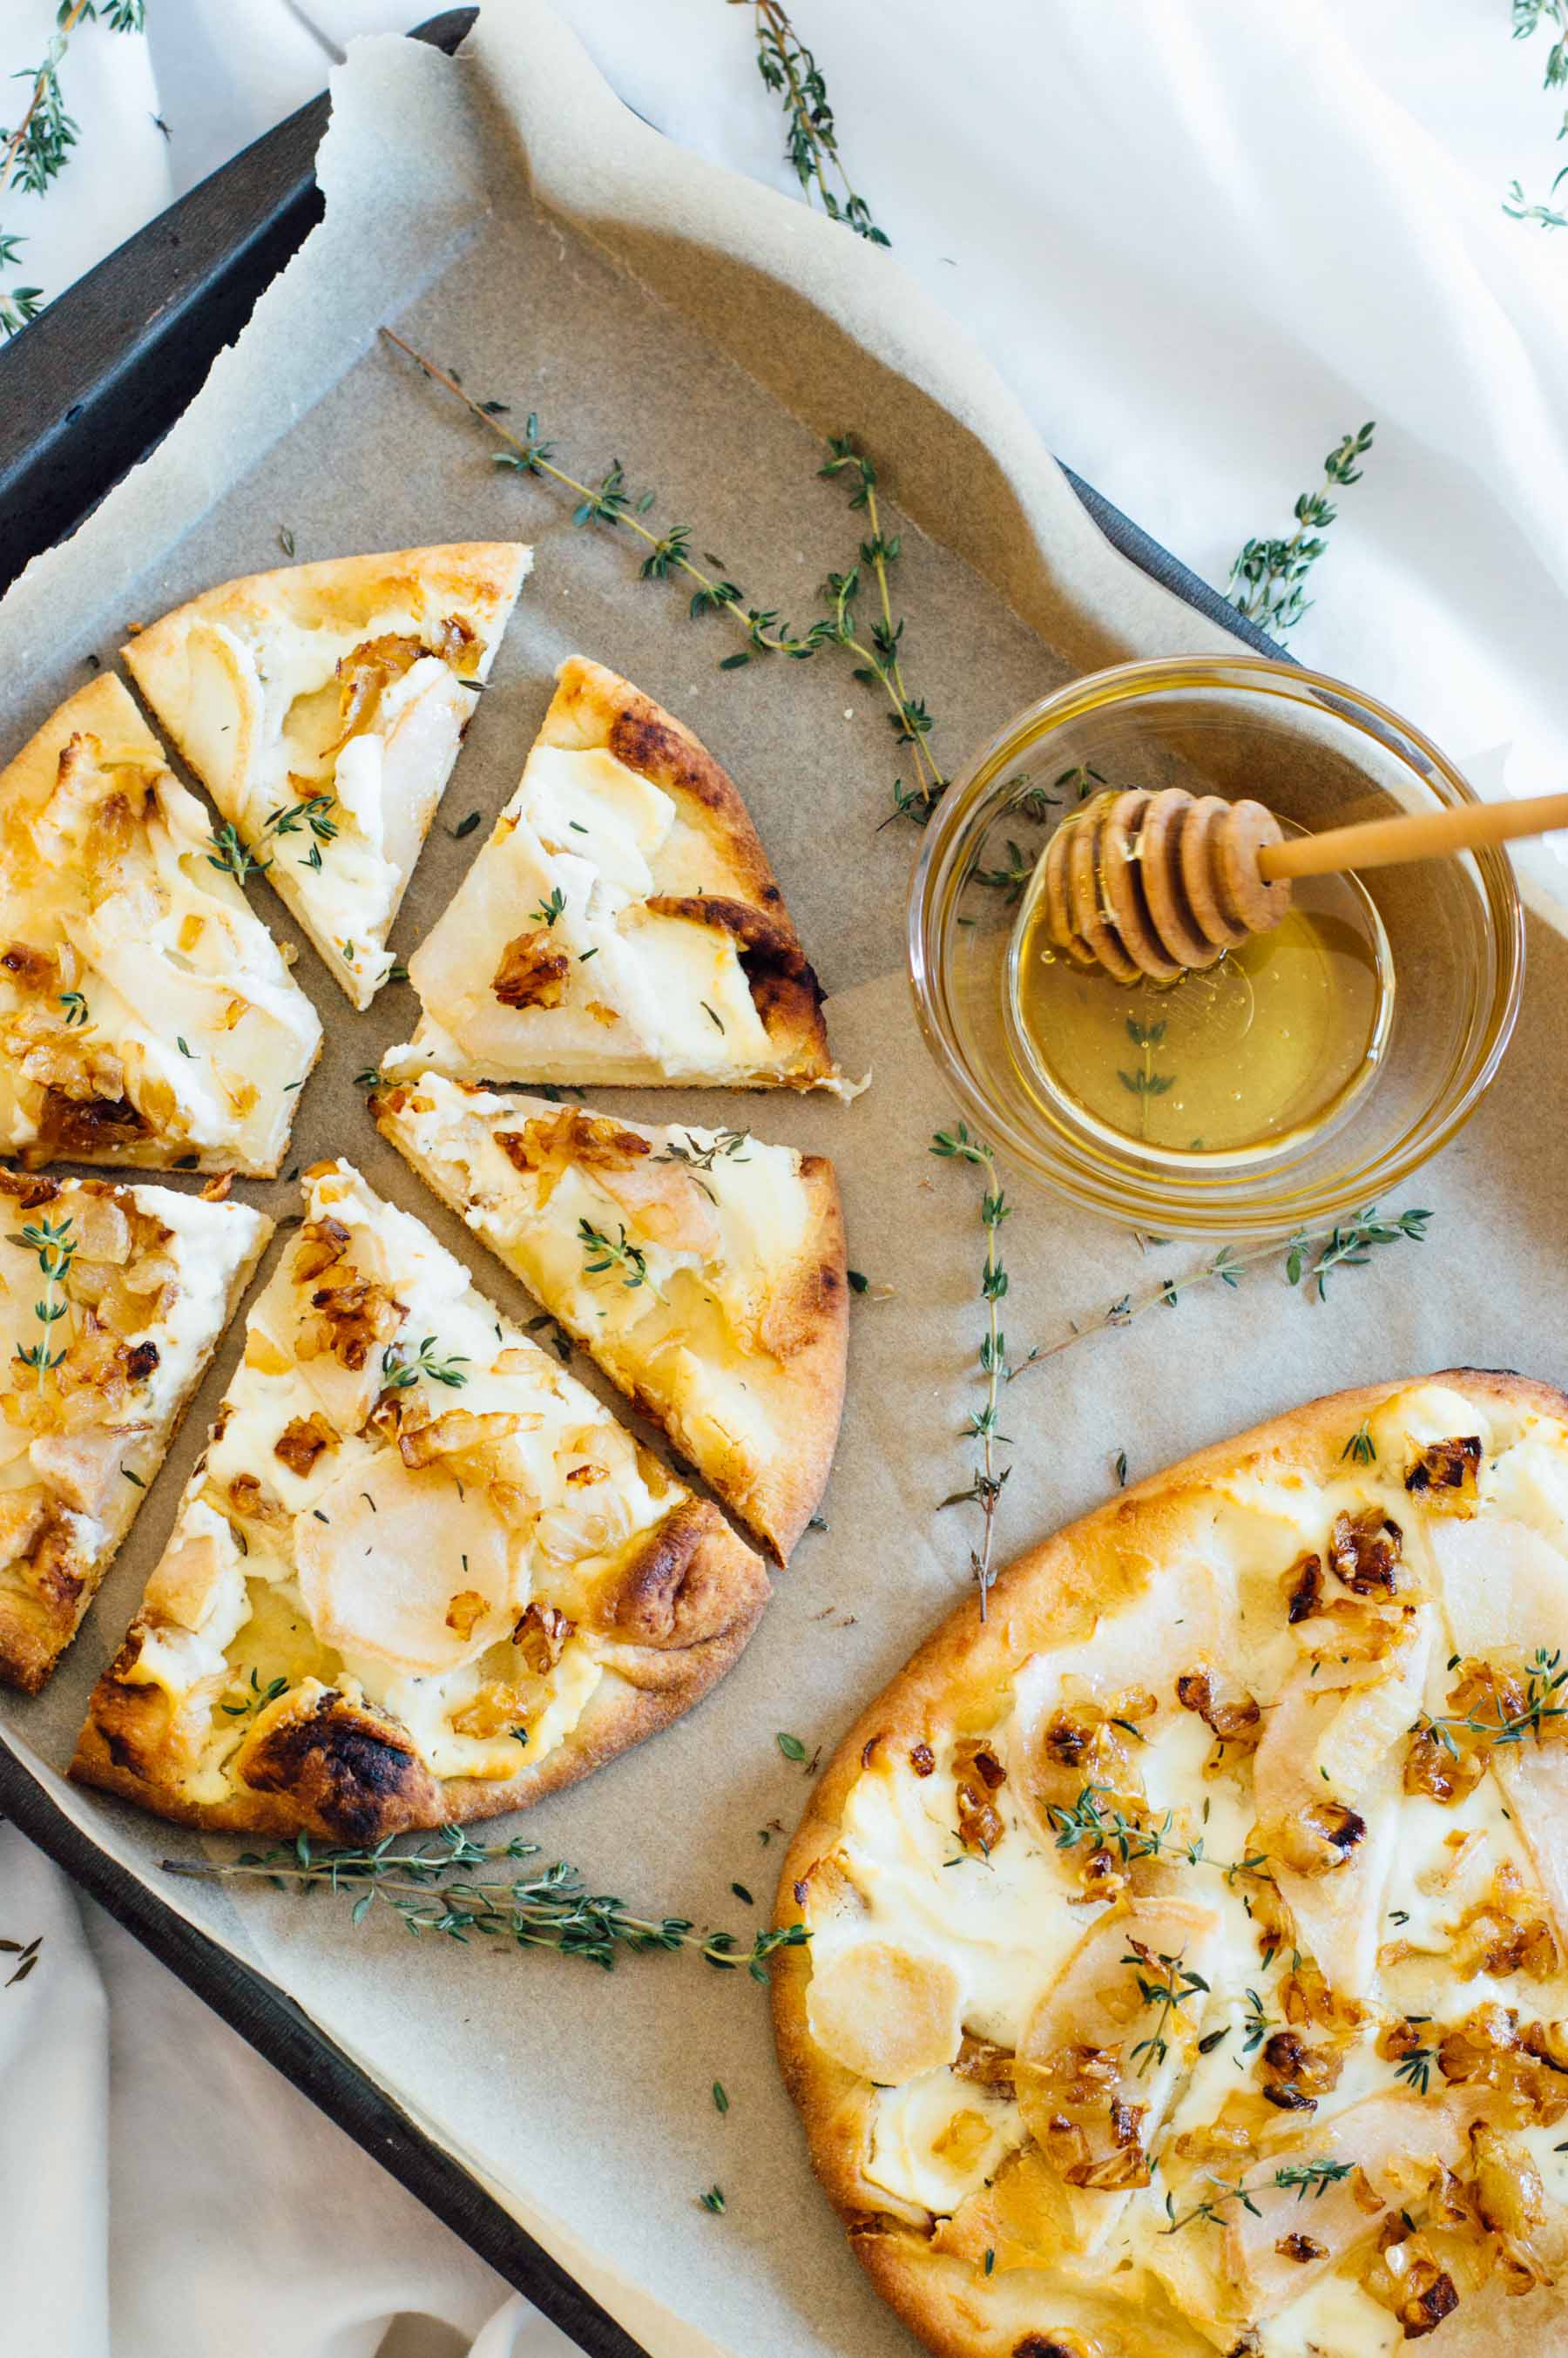 Pear Naan Pizza recipe with Honey Whipped Goat Cheese, fresh thyme and a honey drizzle. | bygabriella.co